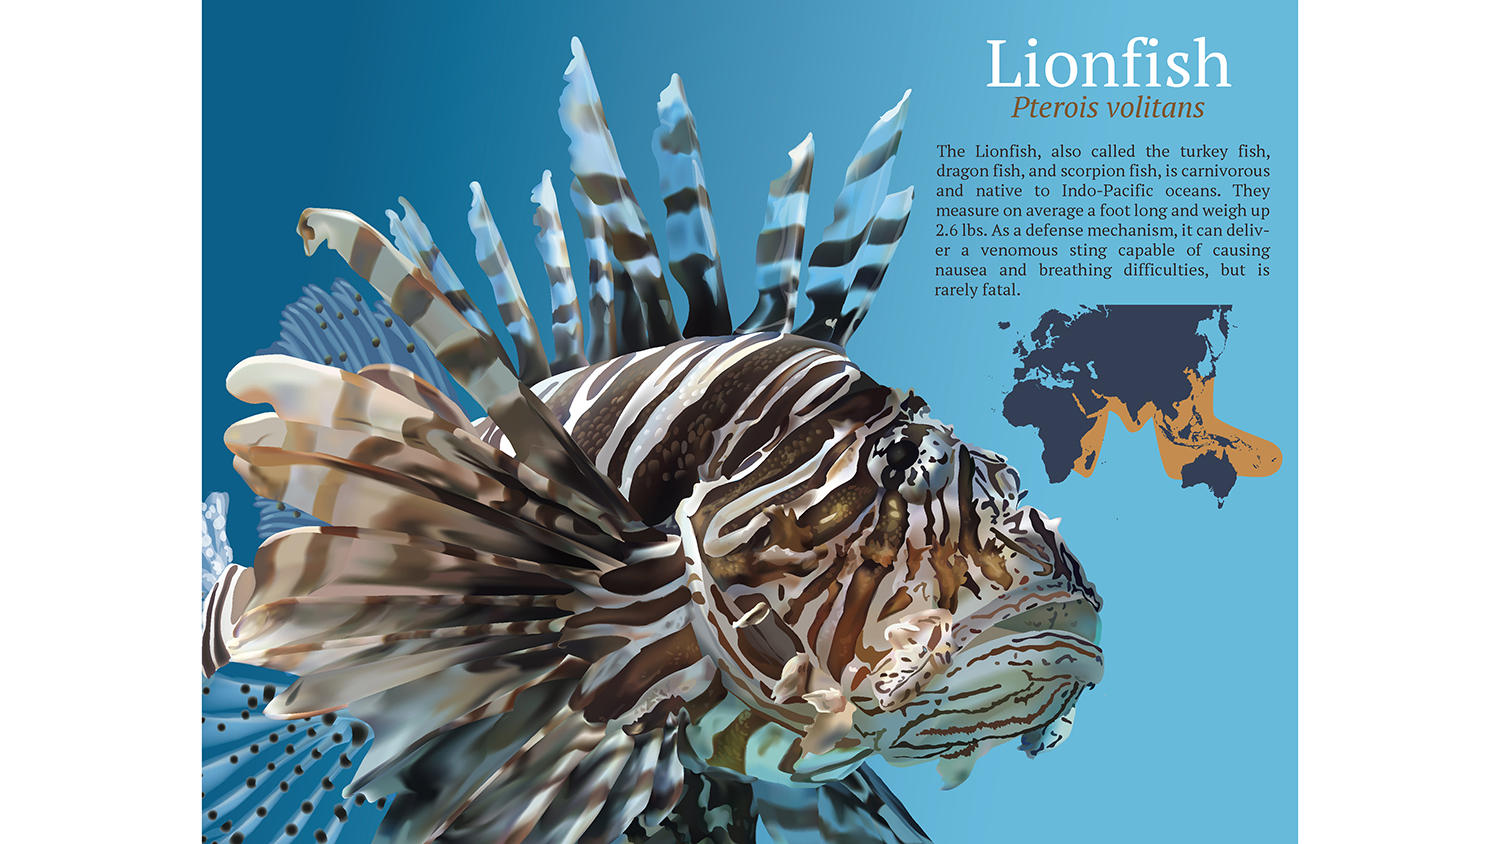 An illustration of a lionfish